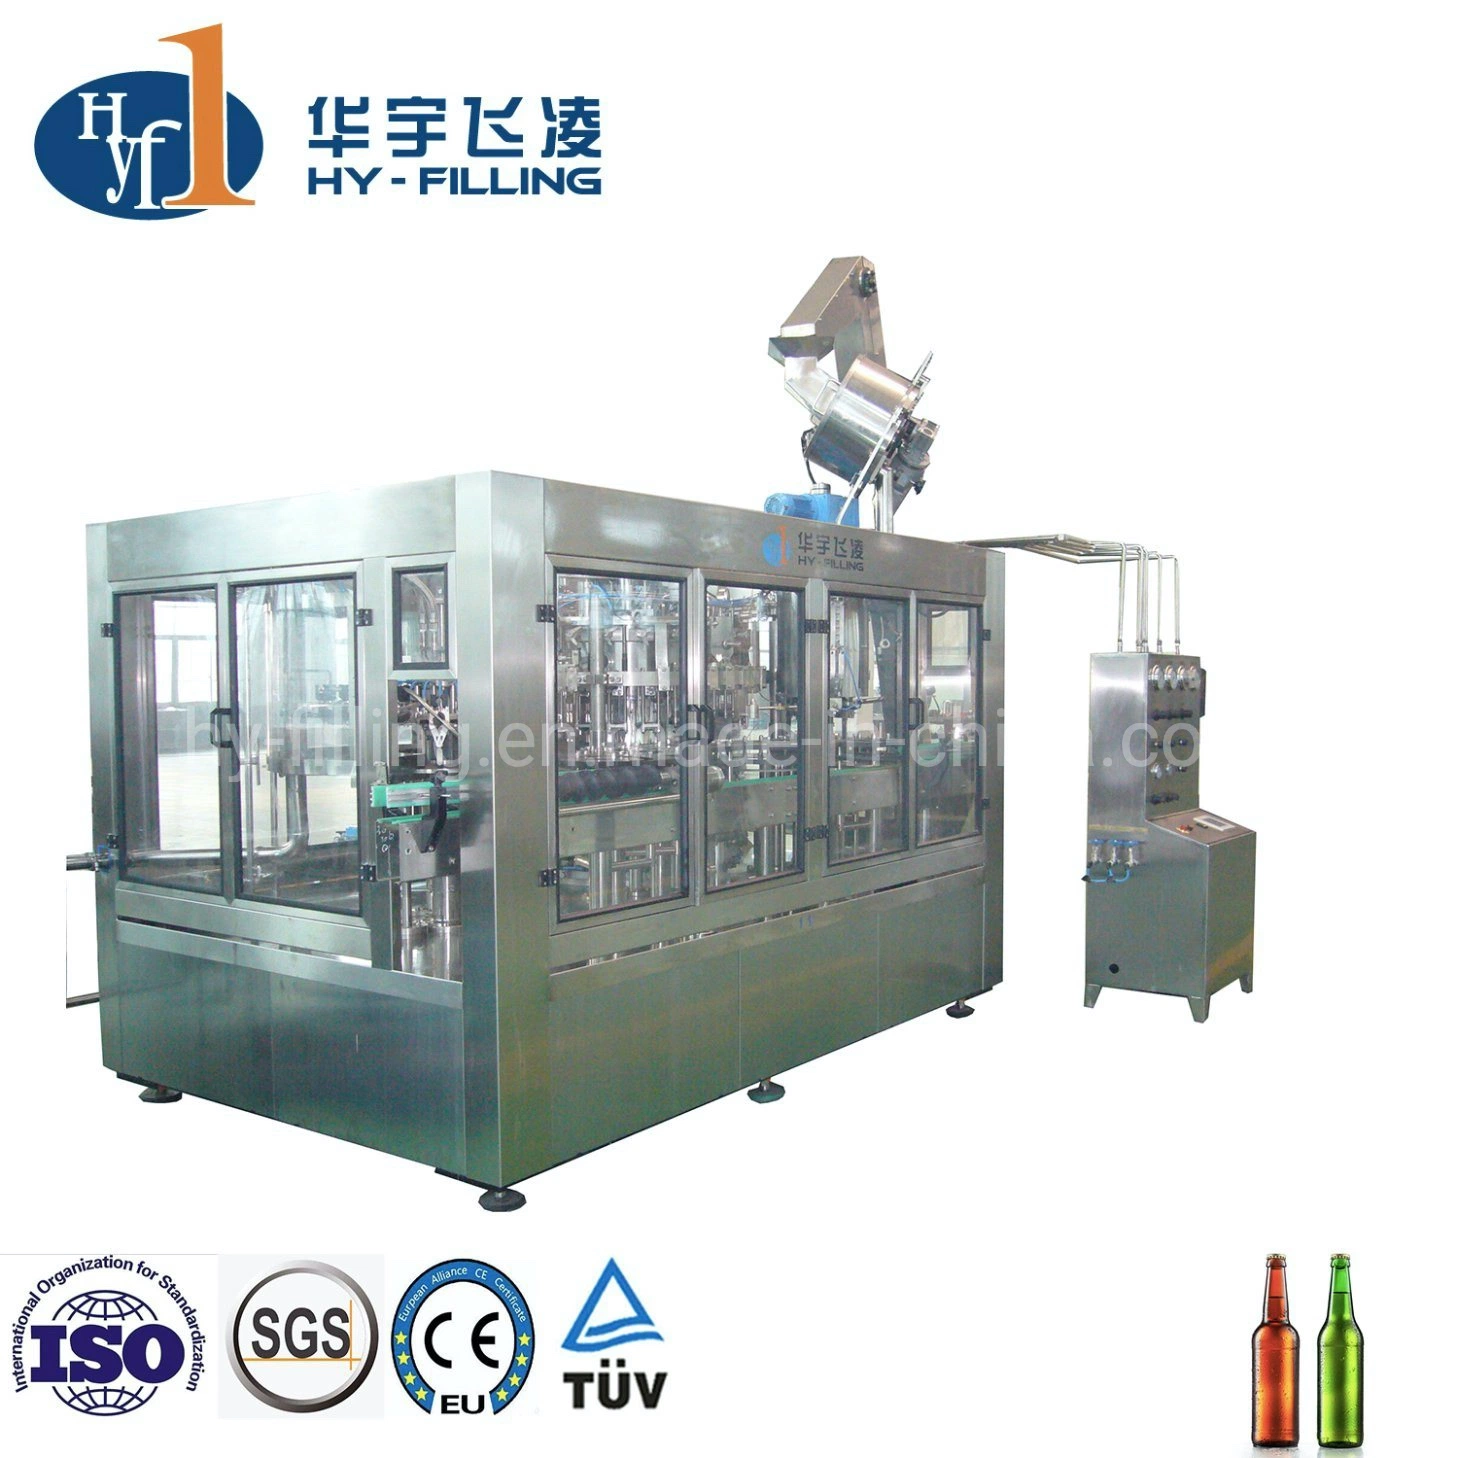 Hy-Filling Count Pressure Washer Filling Capper Machine with Low Price for Beer/CSD/Kombucha